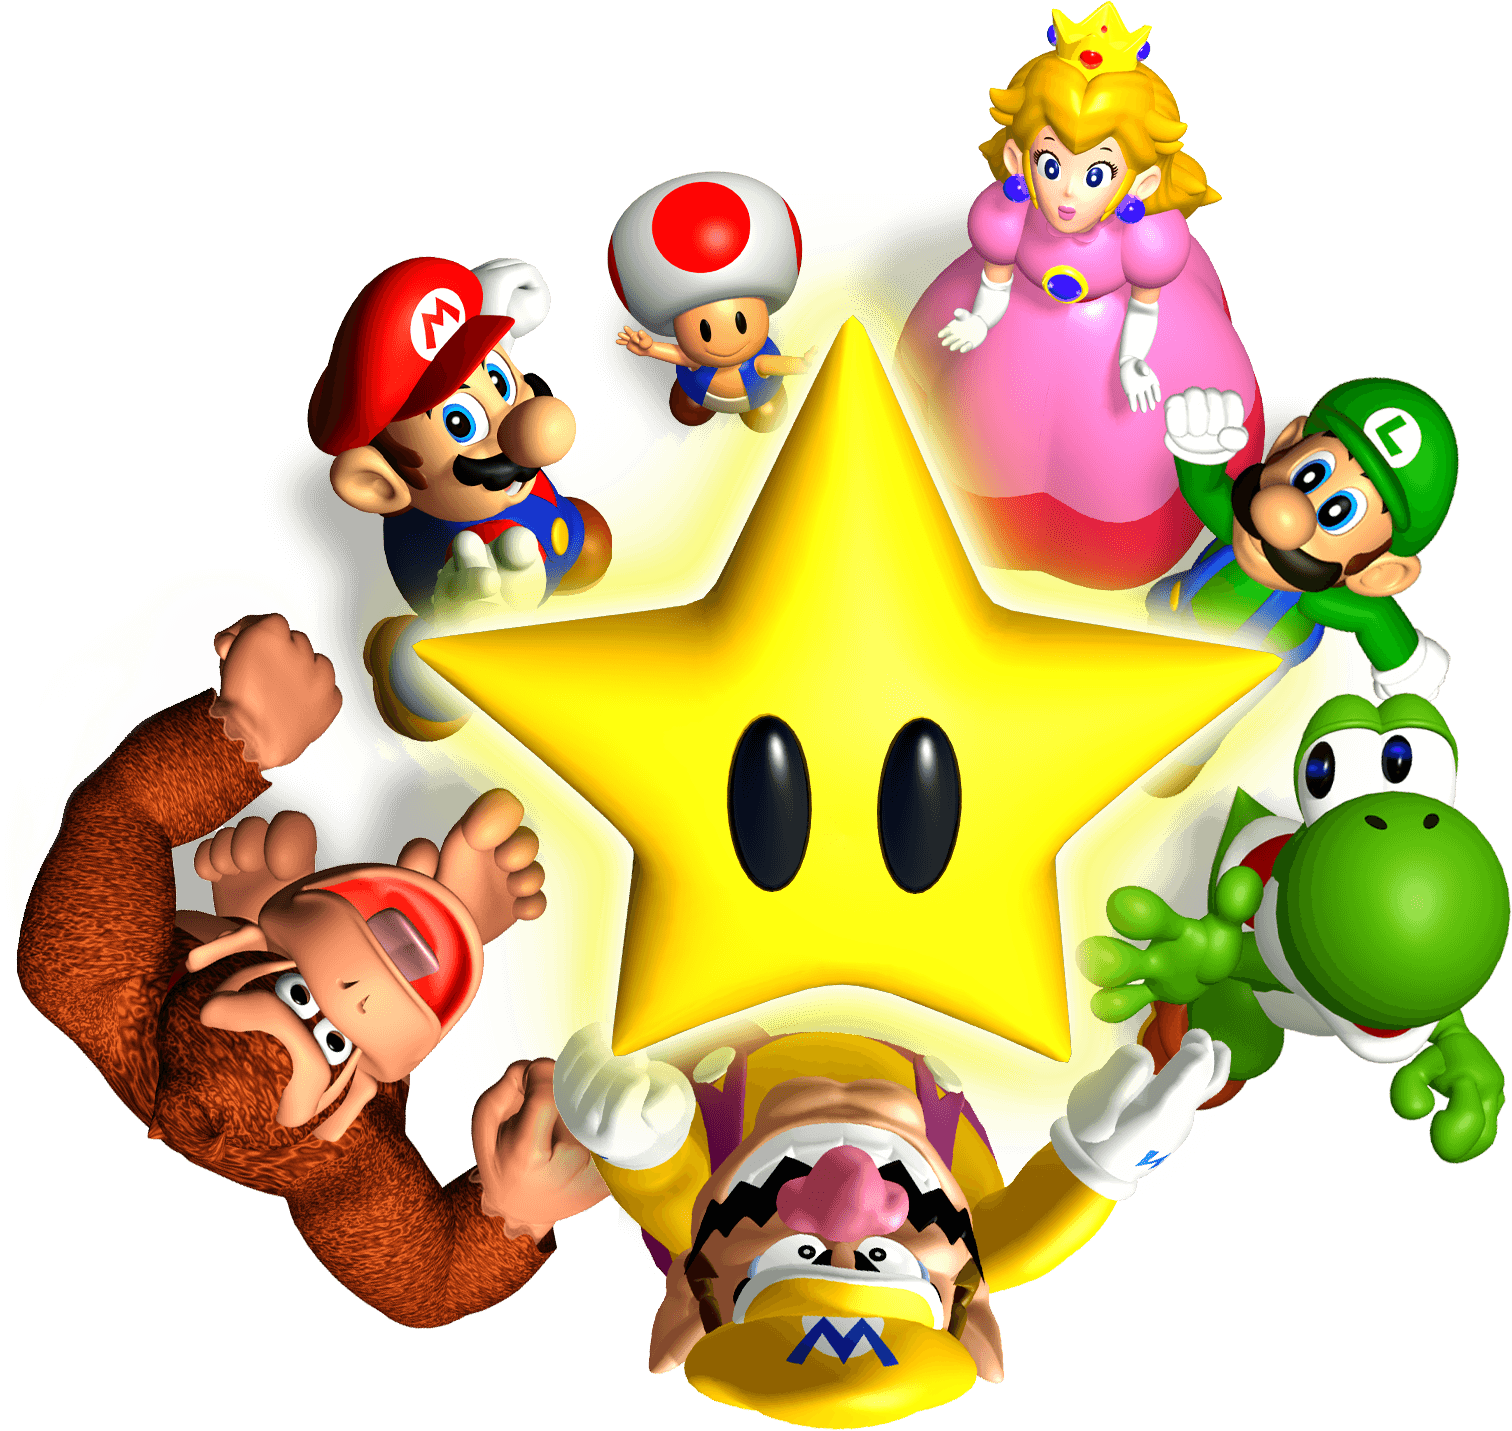 Mario Party (Nintendo 64) Artwork including Characters, Game Board Art